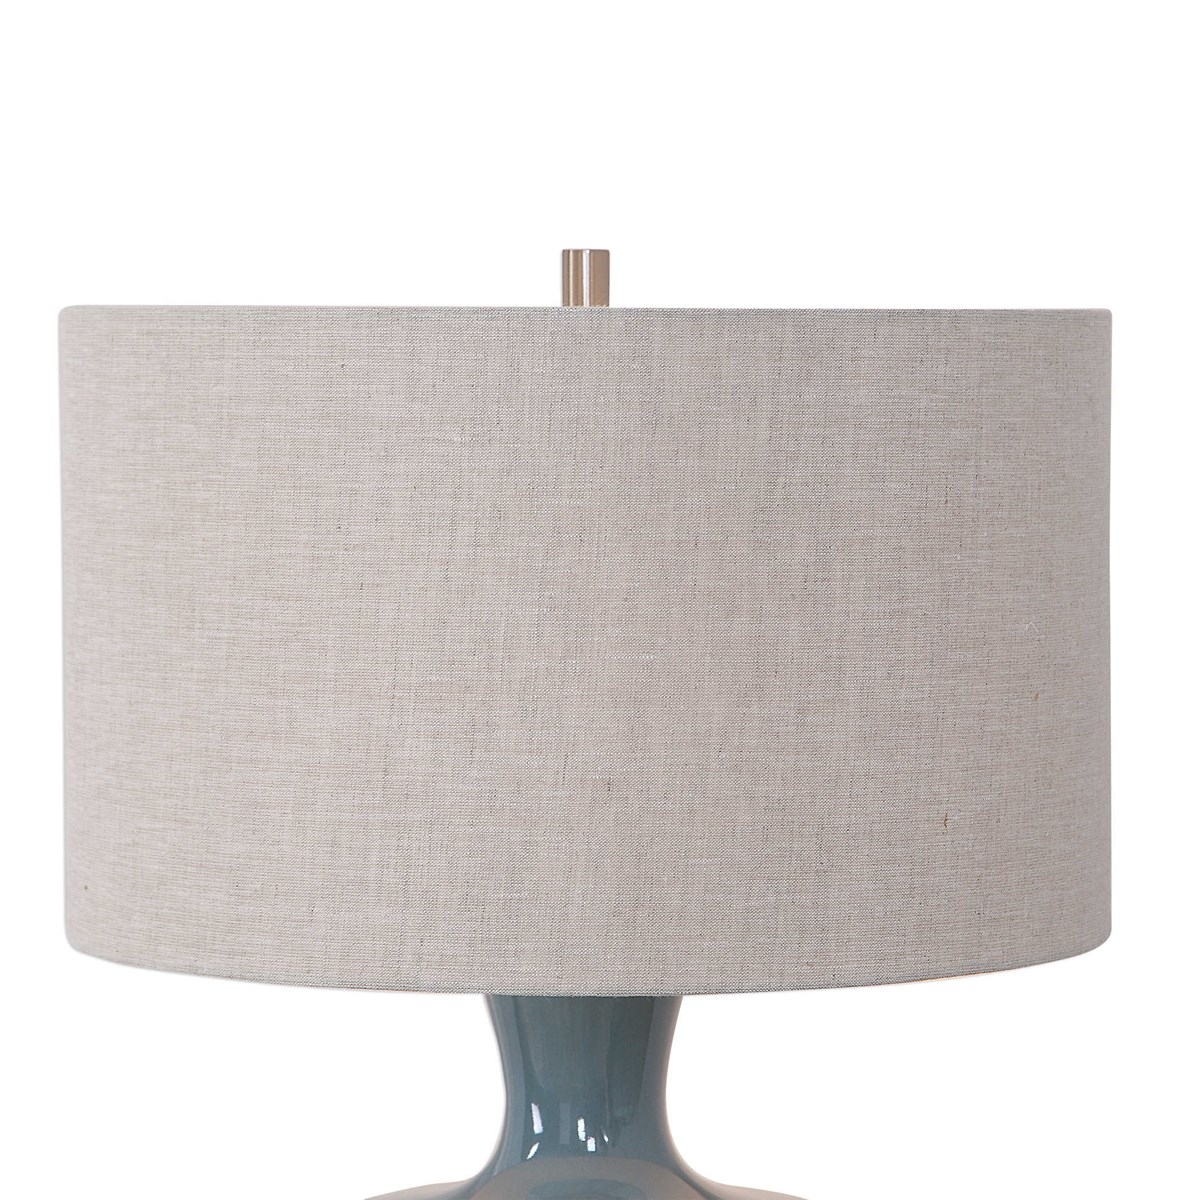 Hearst Table Lamp - Image 3